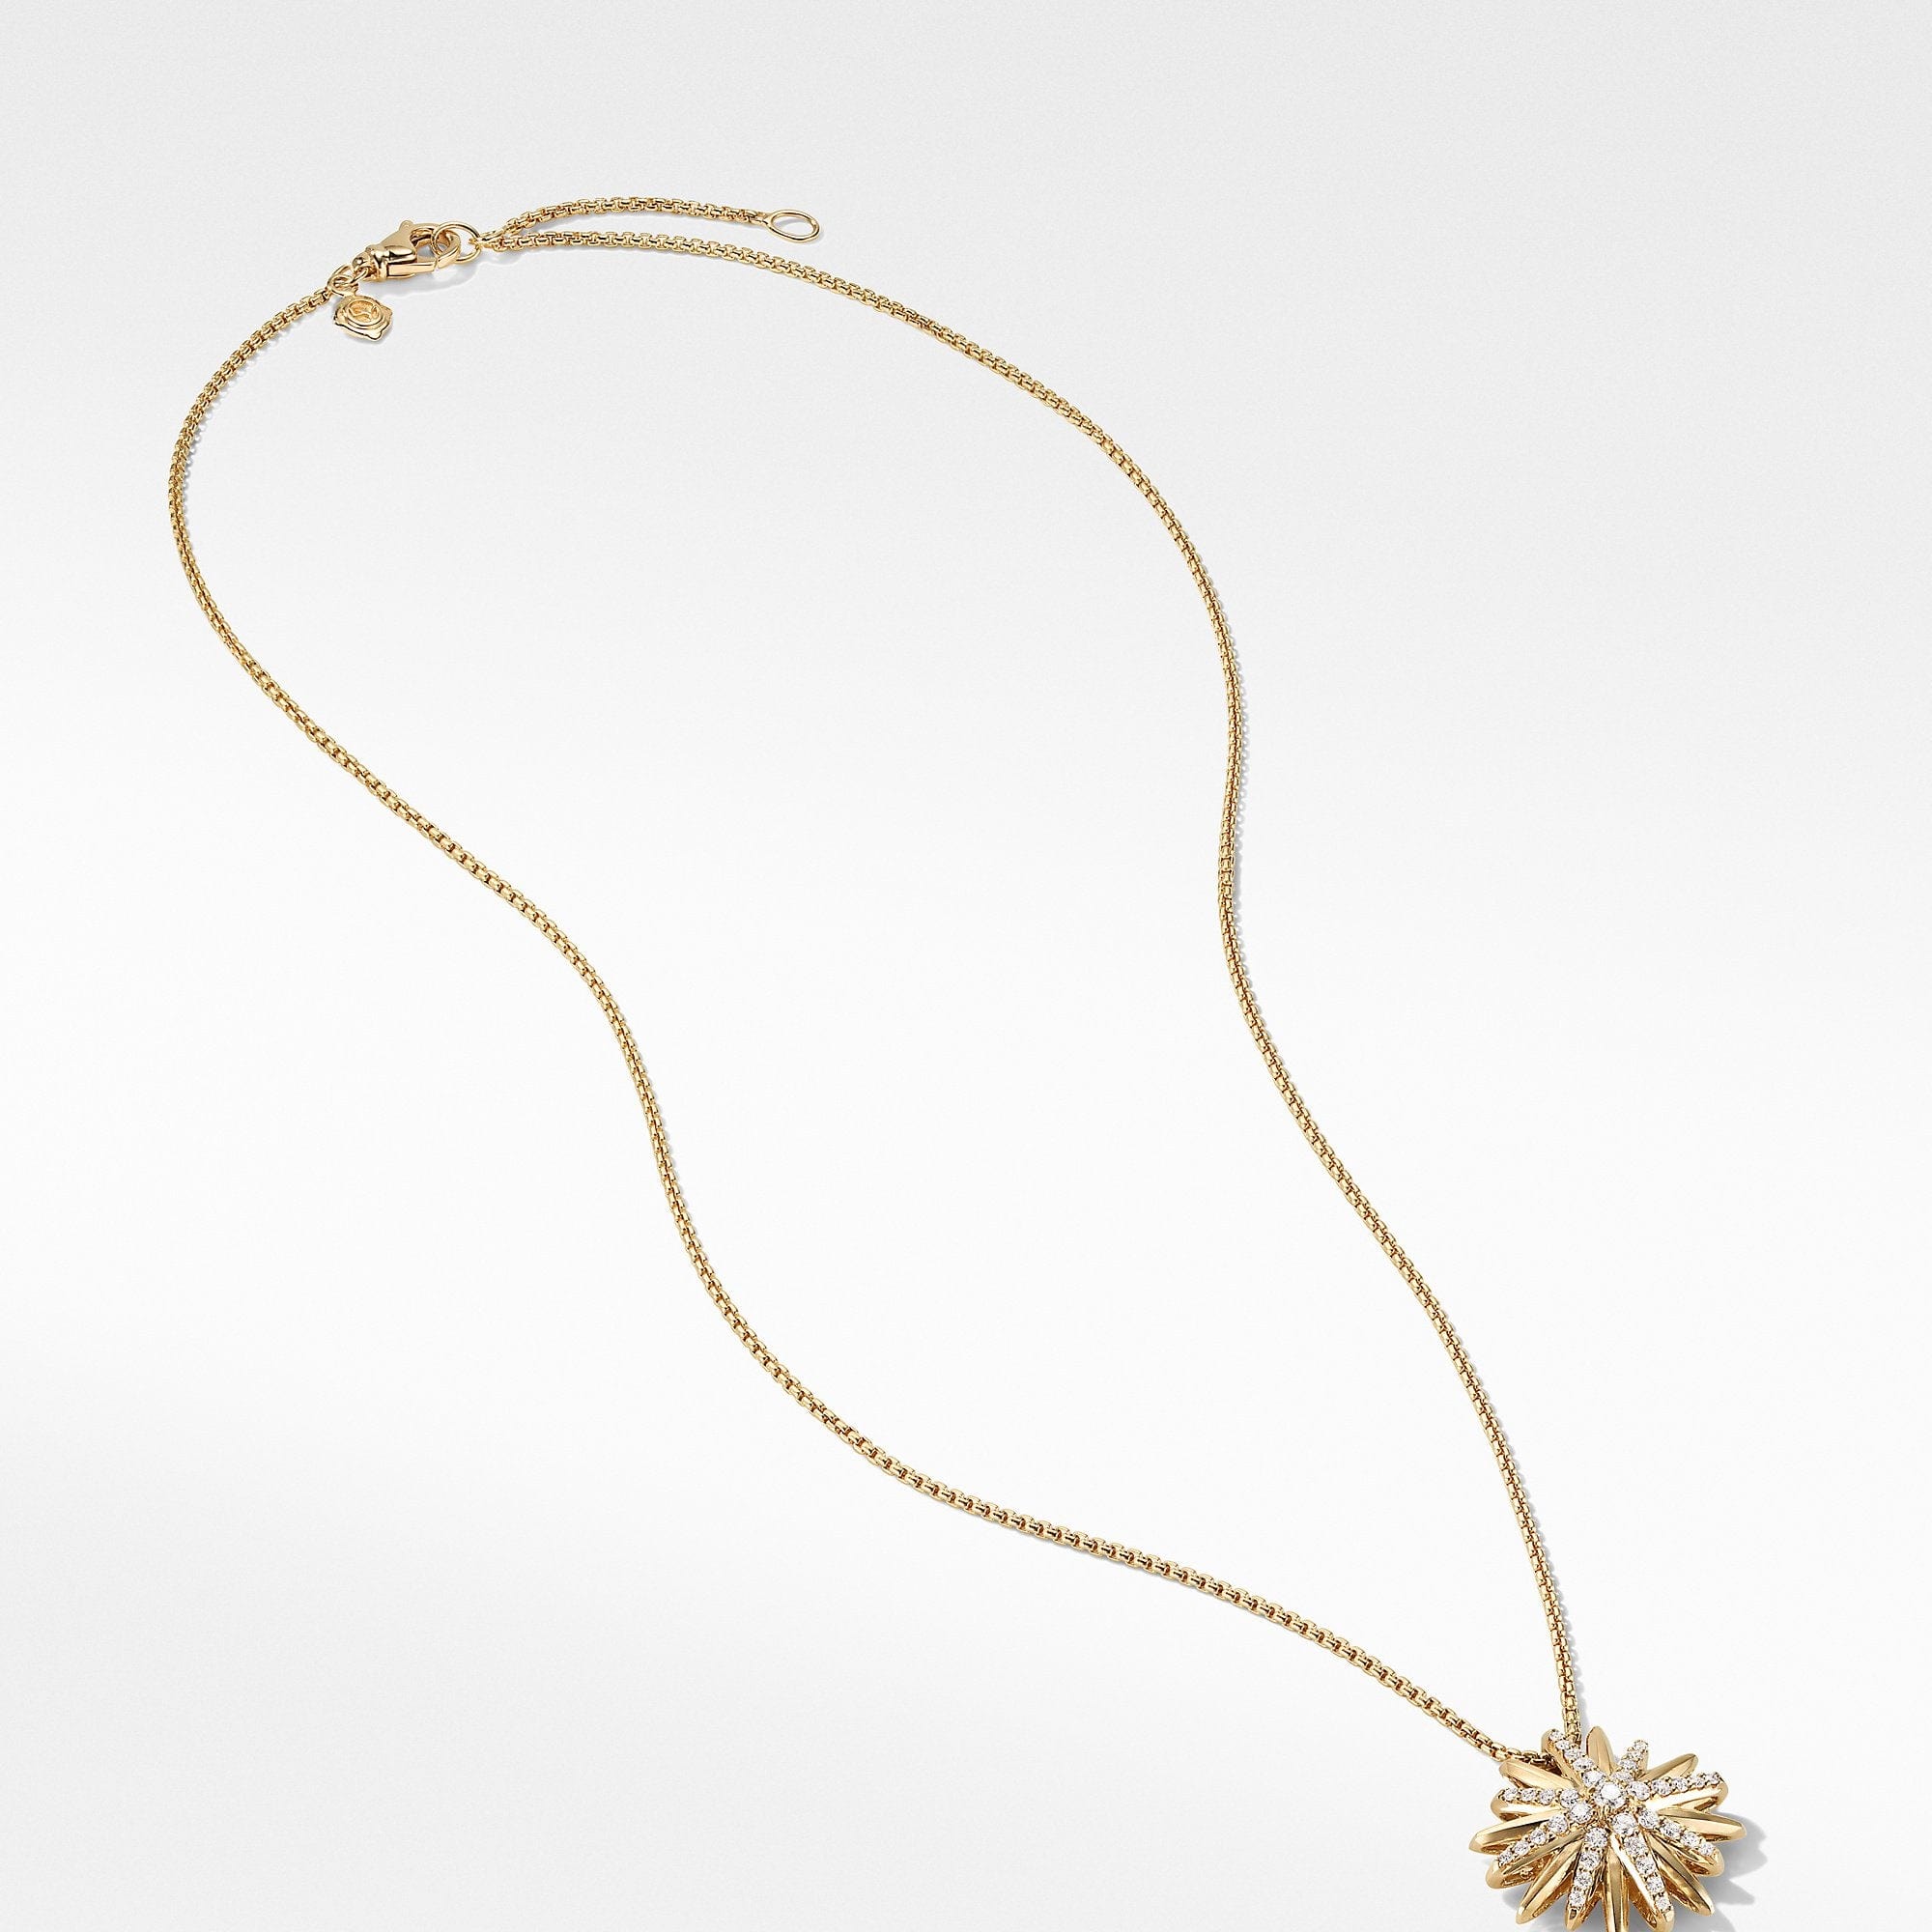 Starburst Pendant Necklace in 18K Yellow Gold with Diamonds